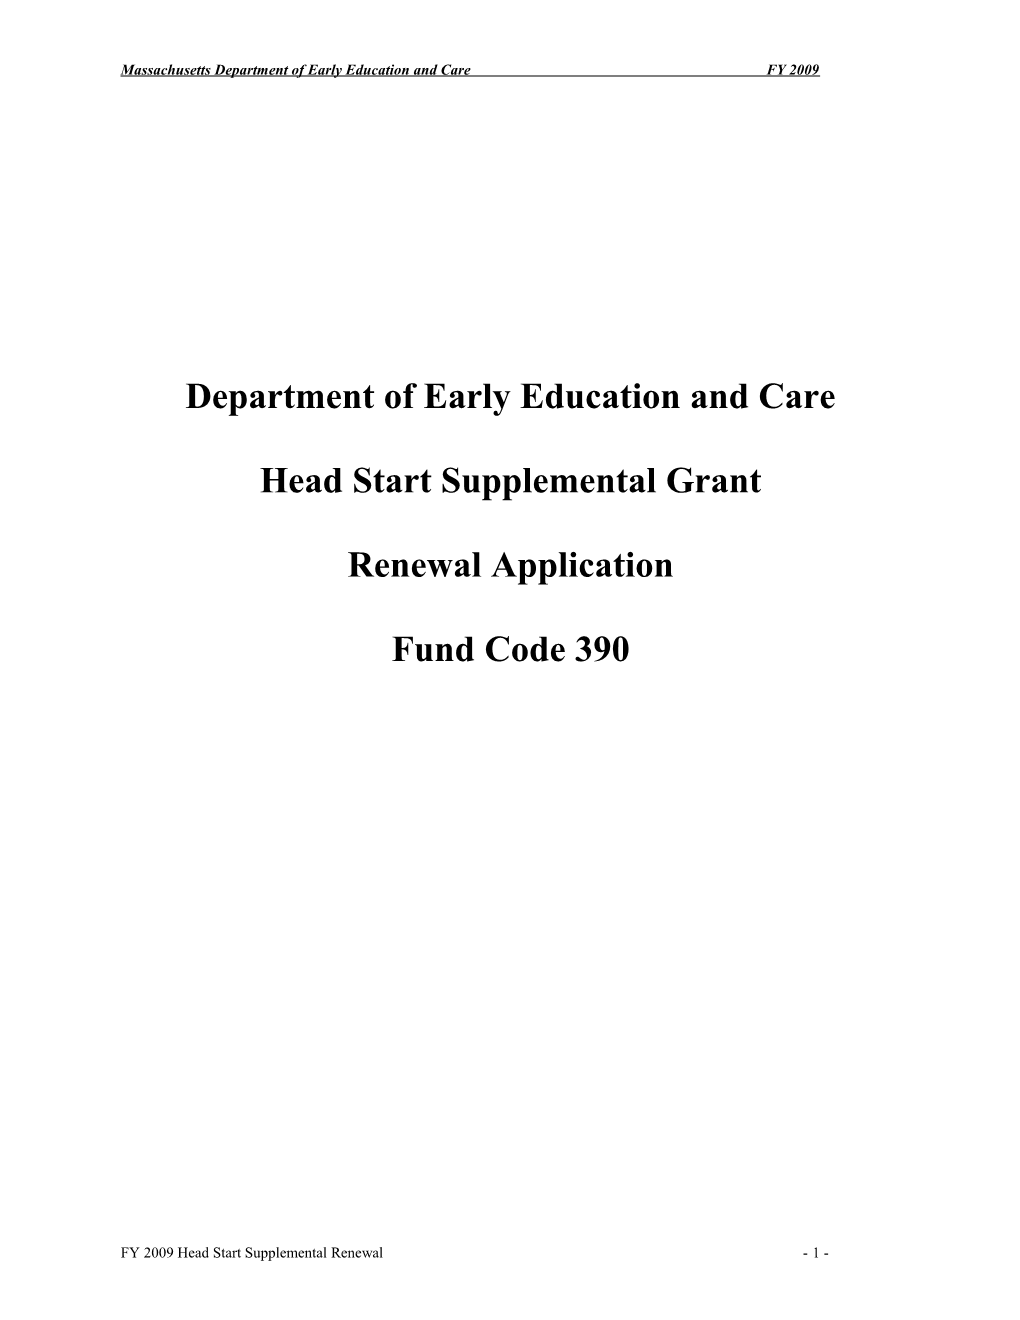 Department of Early Education and Care s1